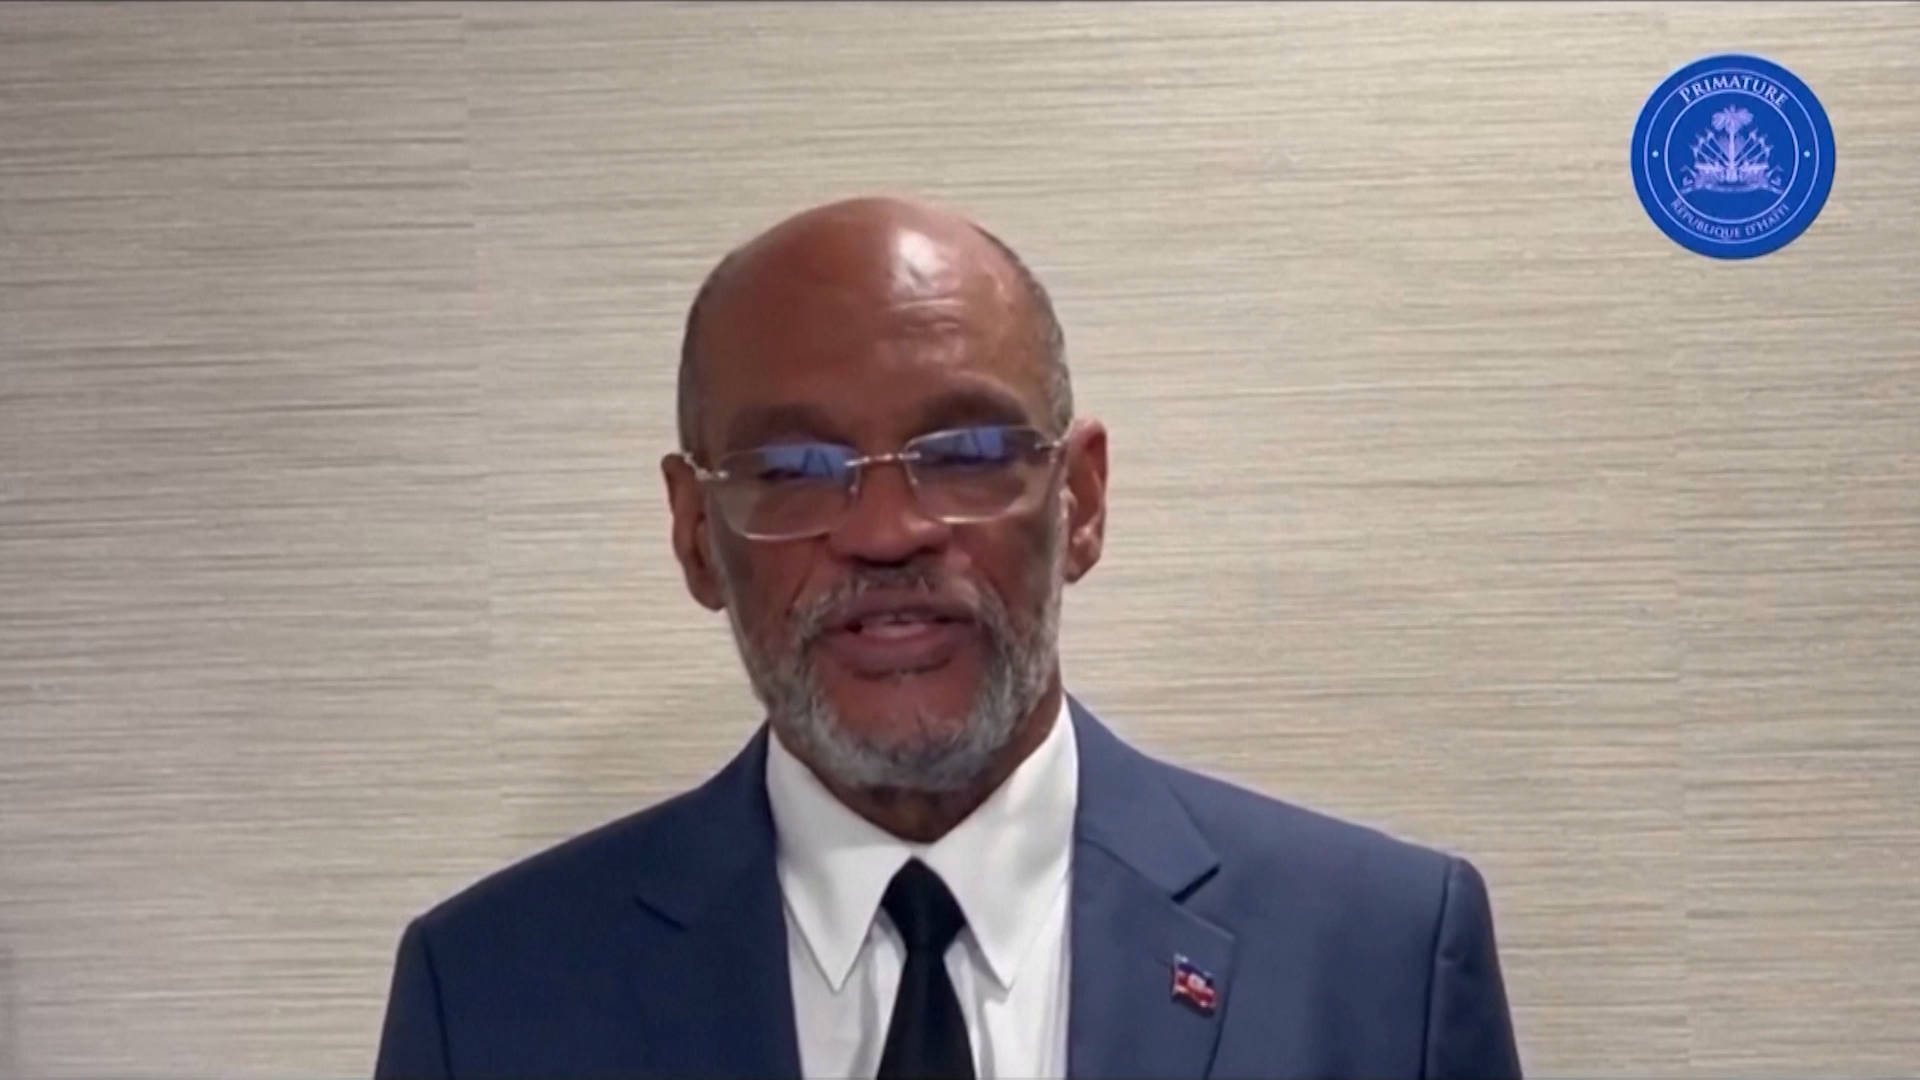 “Haiti needs peace”: Prime Minister Ariel Henry announces his resignation and the Transitional Council forms an interim government